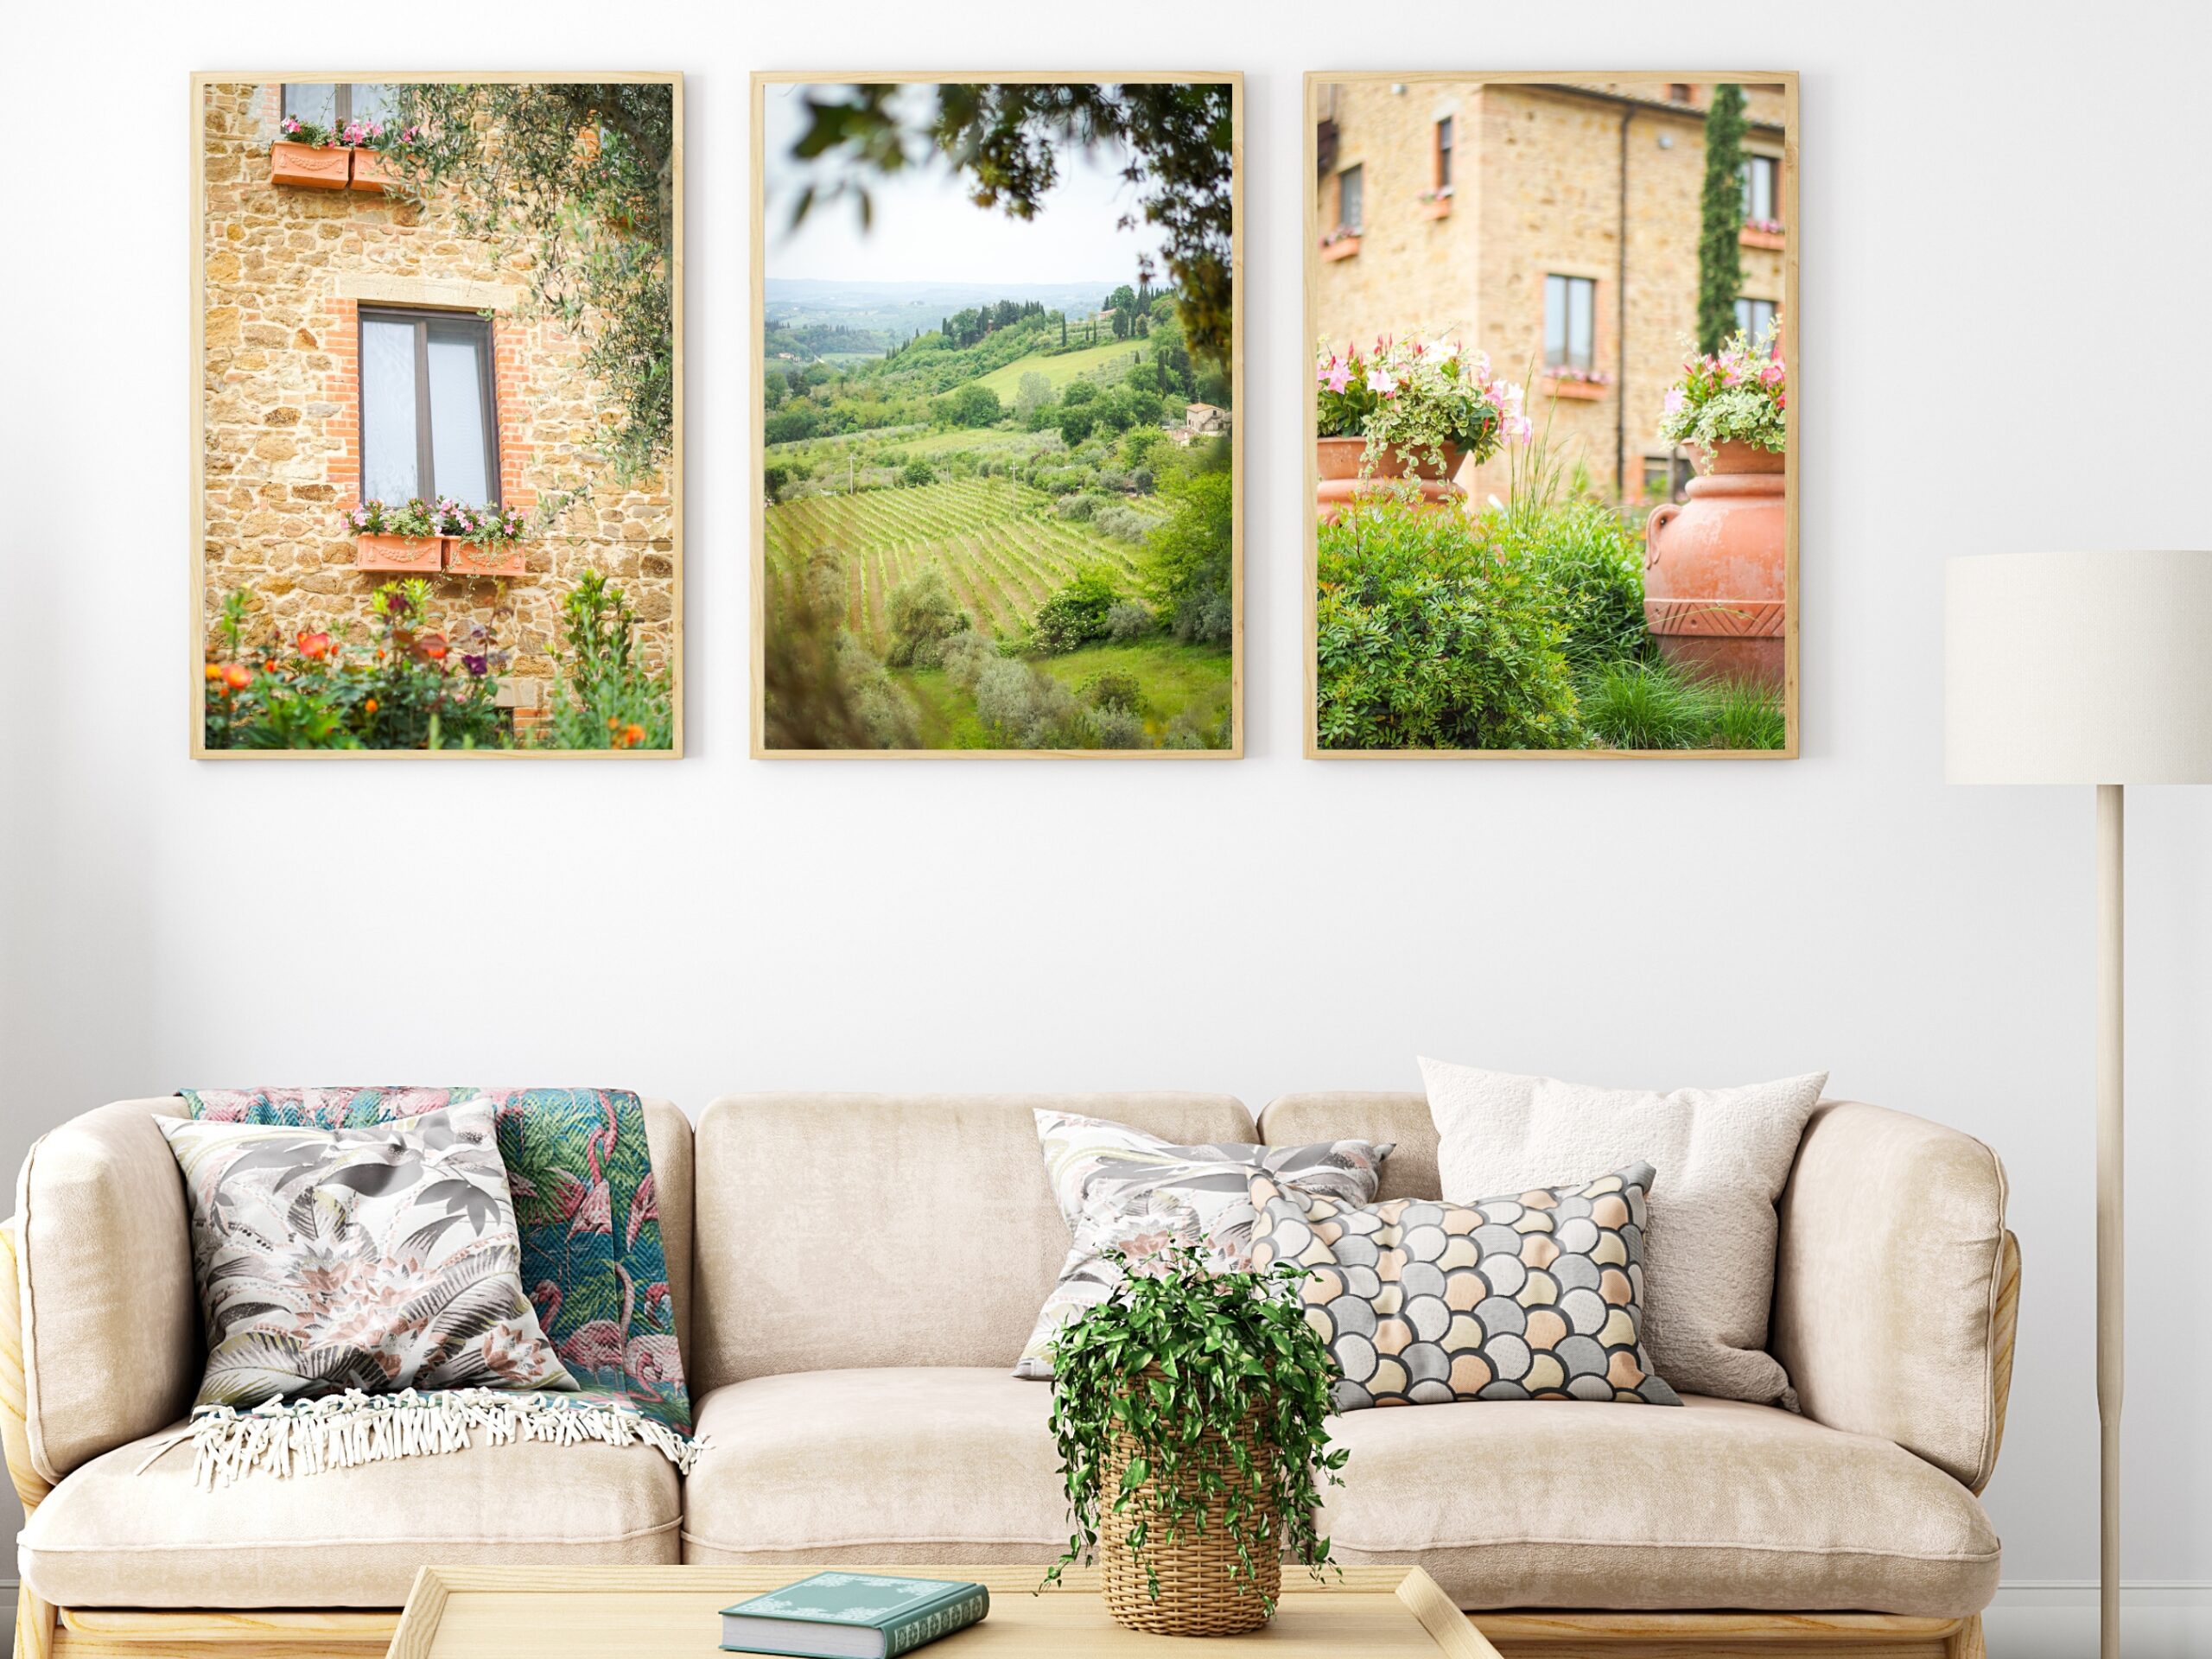 IC Lifestyle Images Releases The Tuscan Dream Collection of Photography Prints